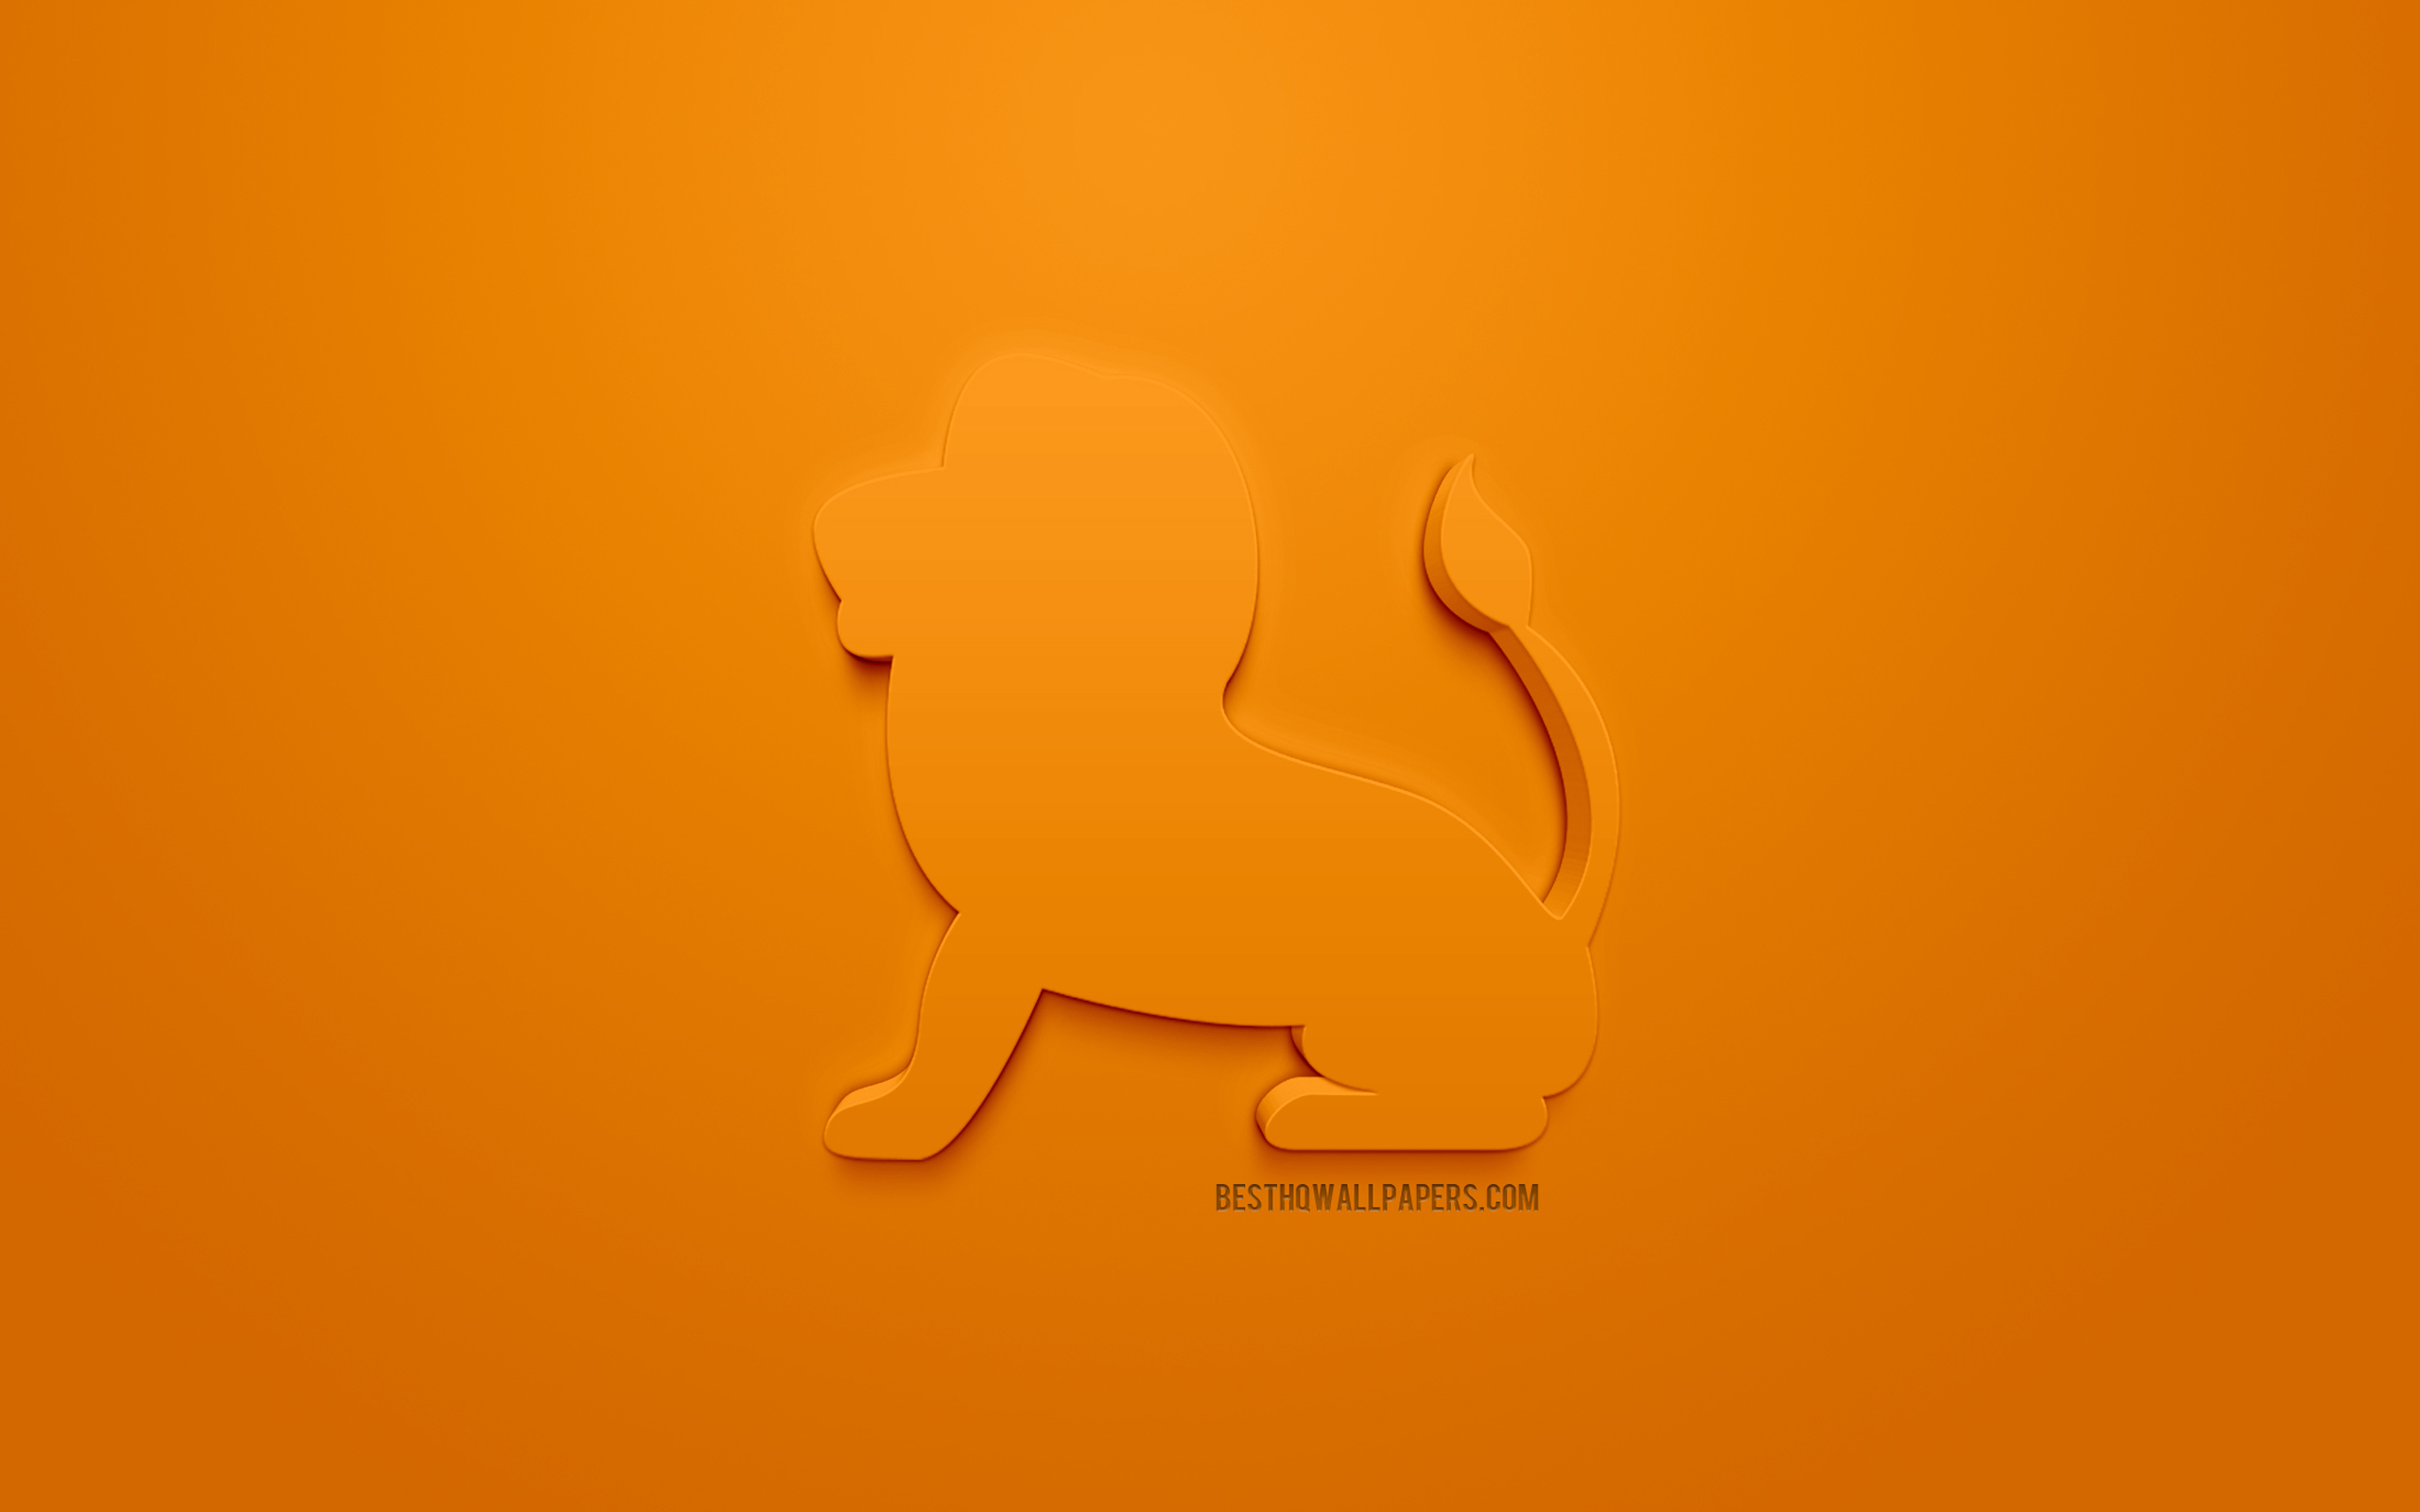 Download wallpaper Leo zodiac sign, 3D zodiac signs, astrology, Leo, 3D astrological sign, orange background, creative 3D art for desktop with resolution 2560x1600. High Quality HD picture wallpaper